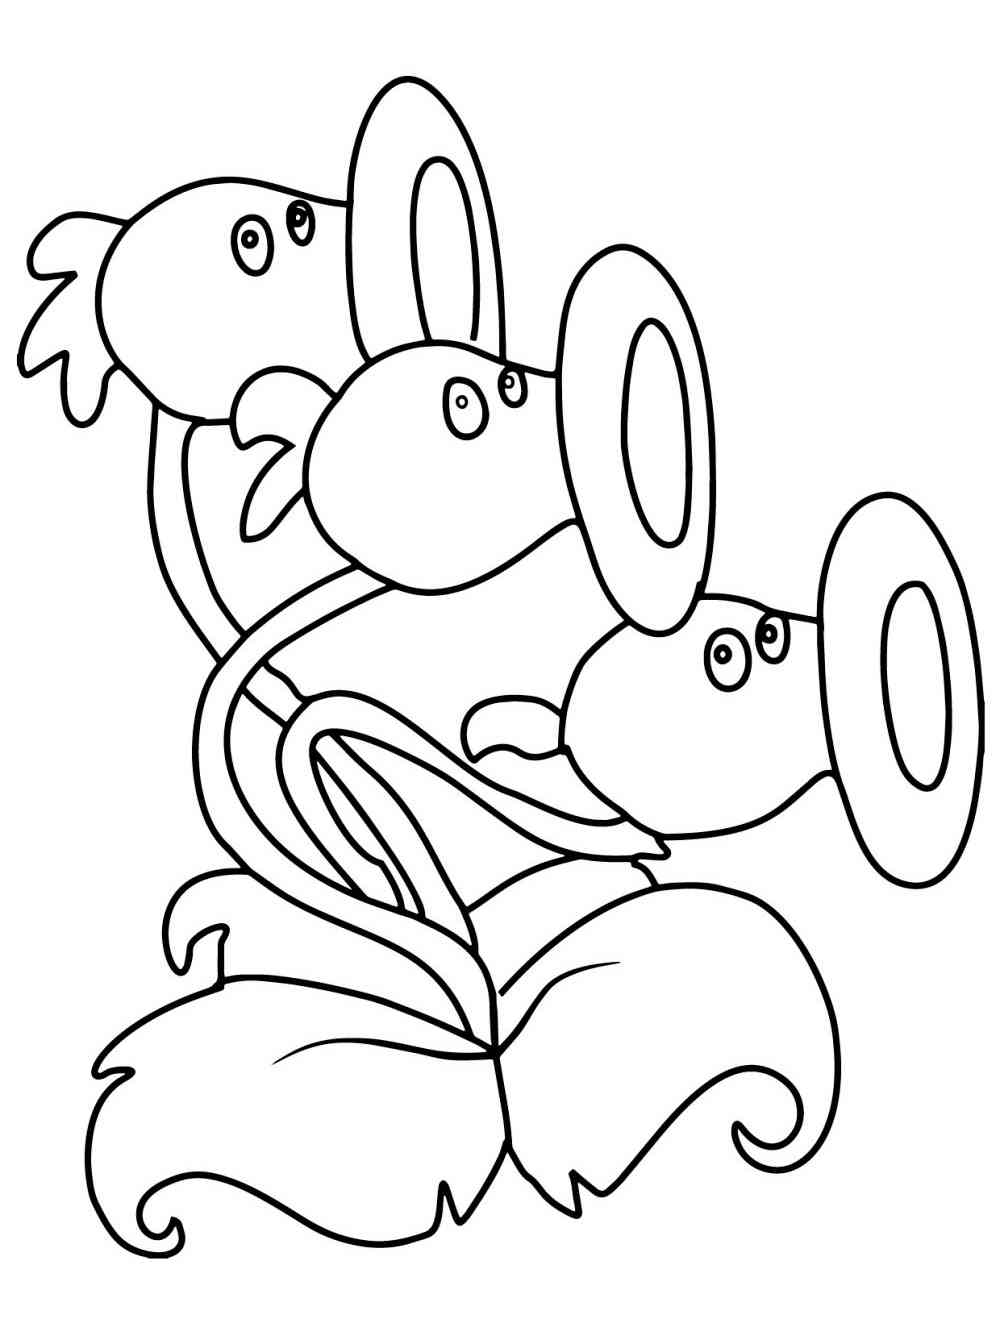 Threepeater from Plants vs. Zombies coloring page